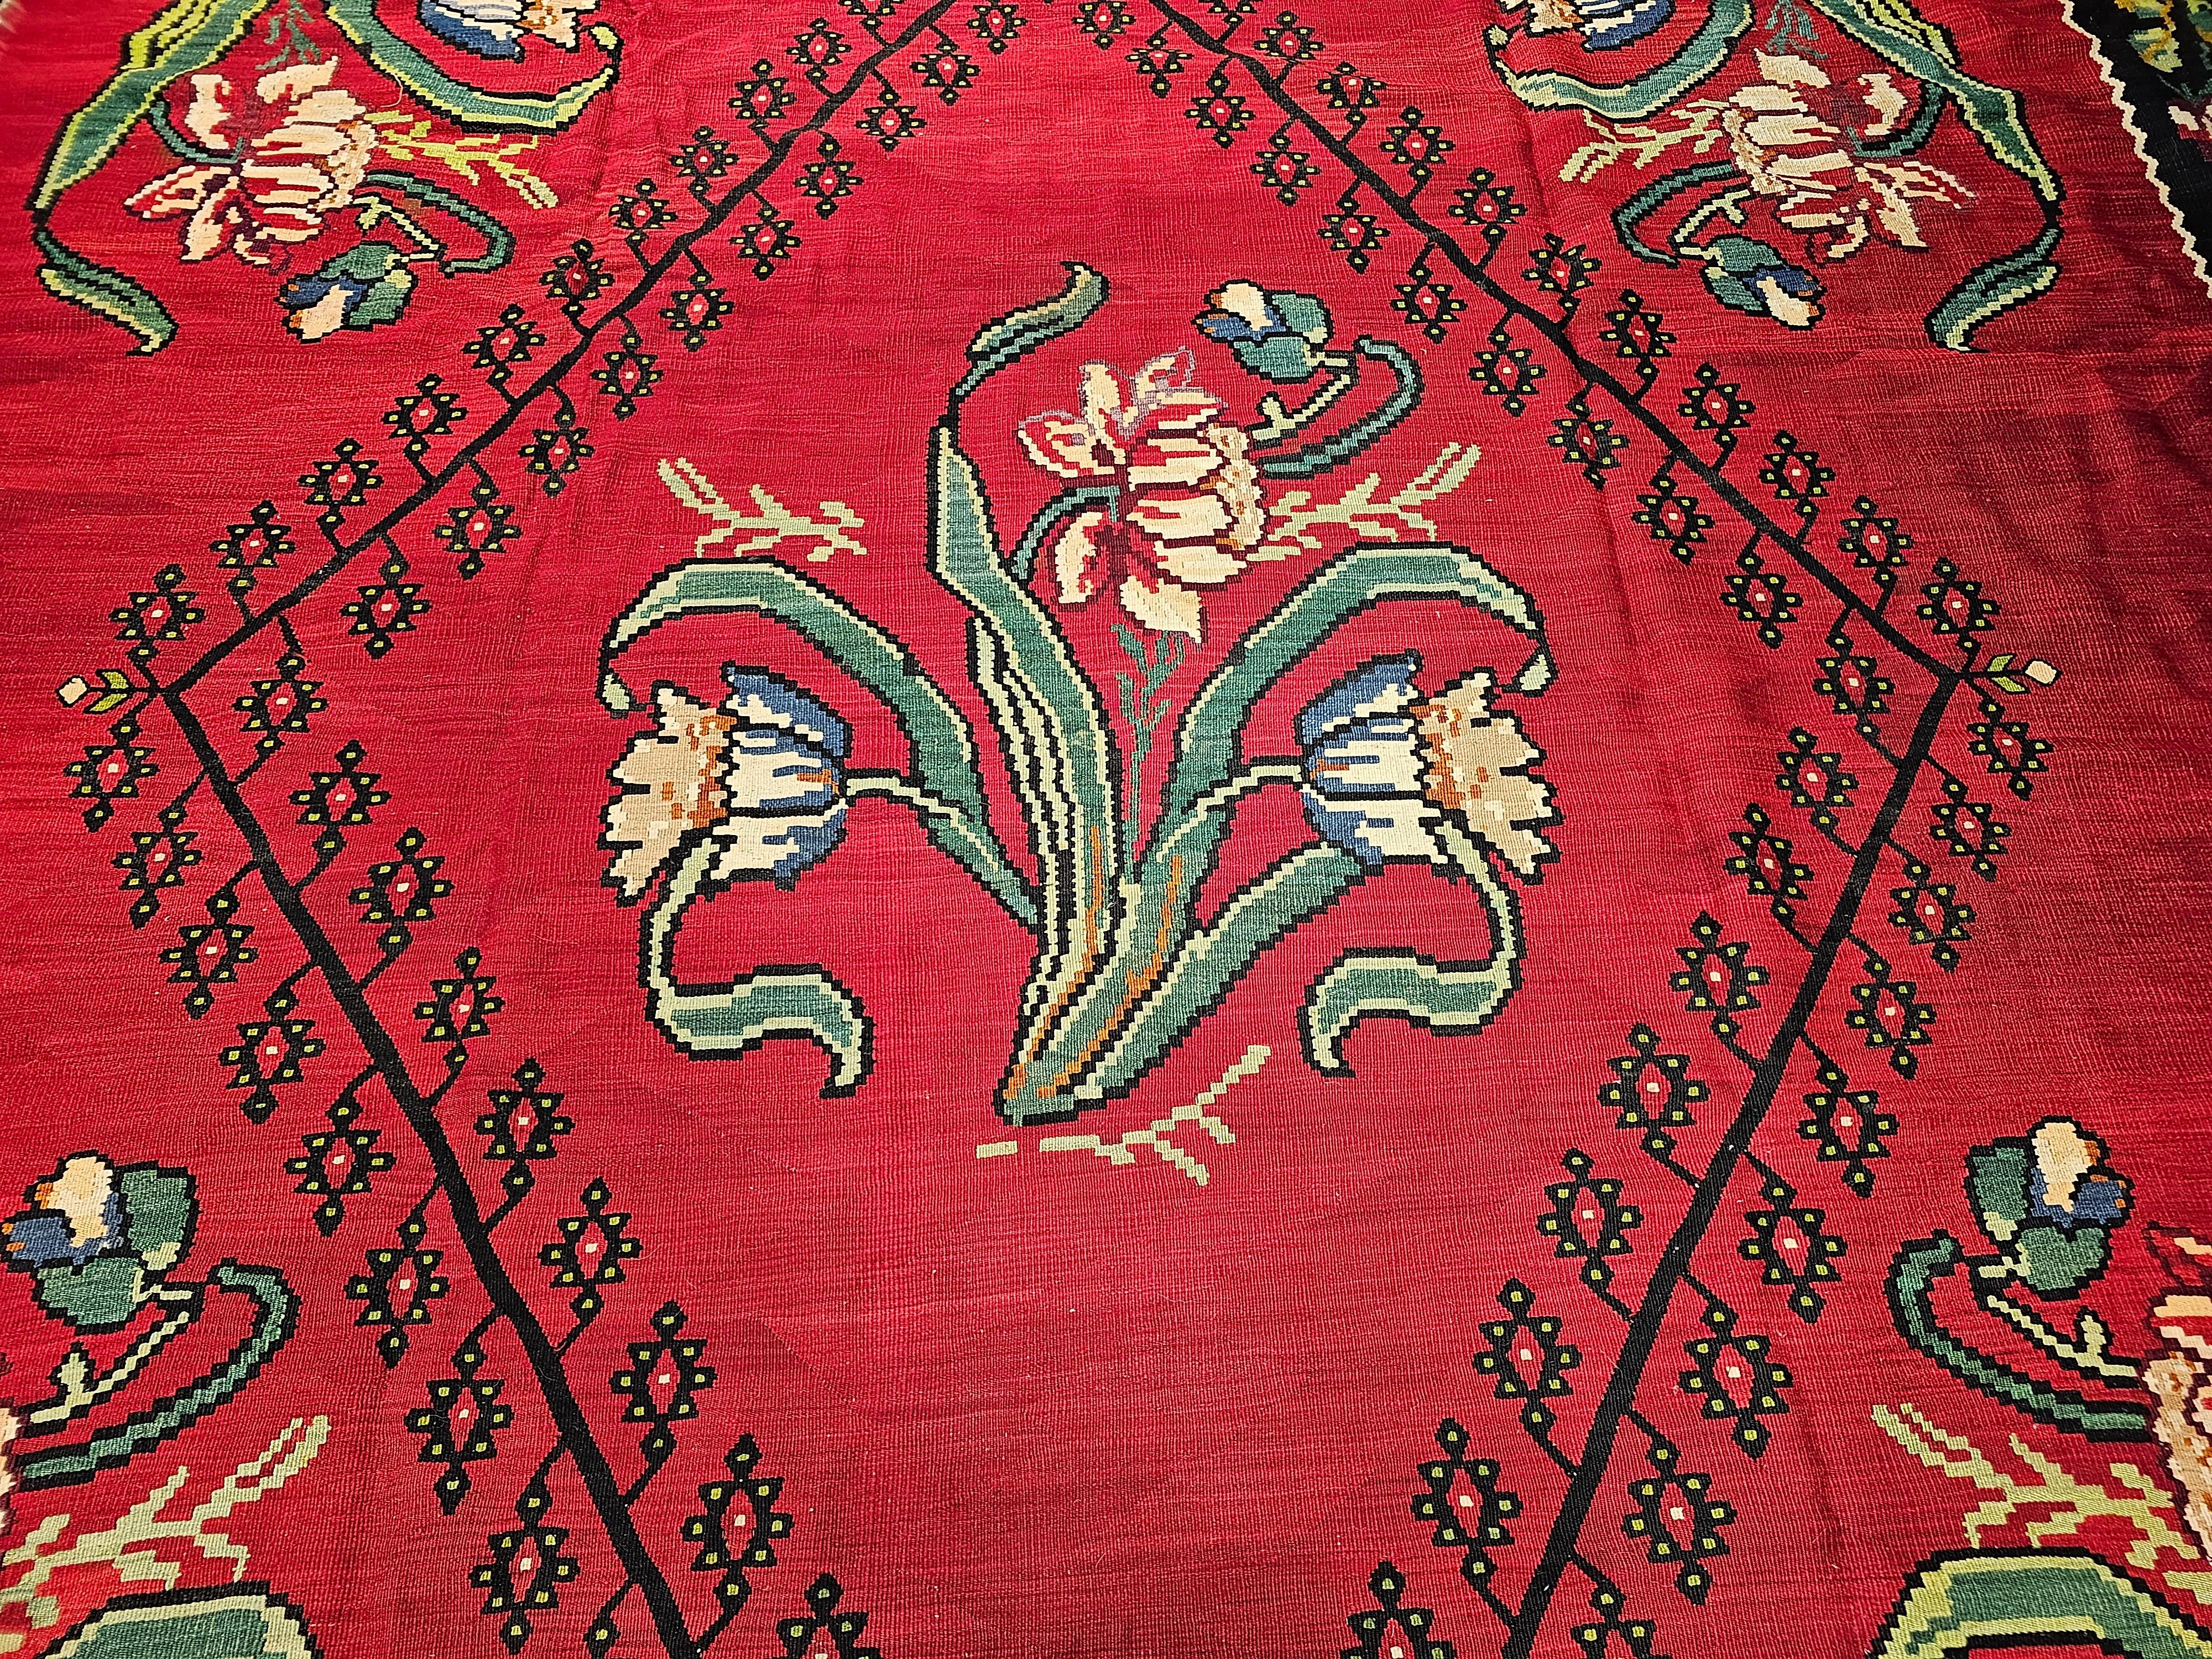 Hand-Woven Vintage Bessarabian Kilim with Large Floral Pattern in Red, Black, Green, Blue For Sale